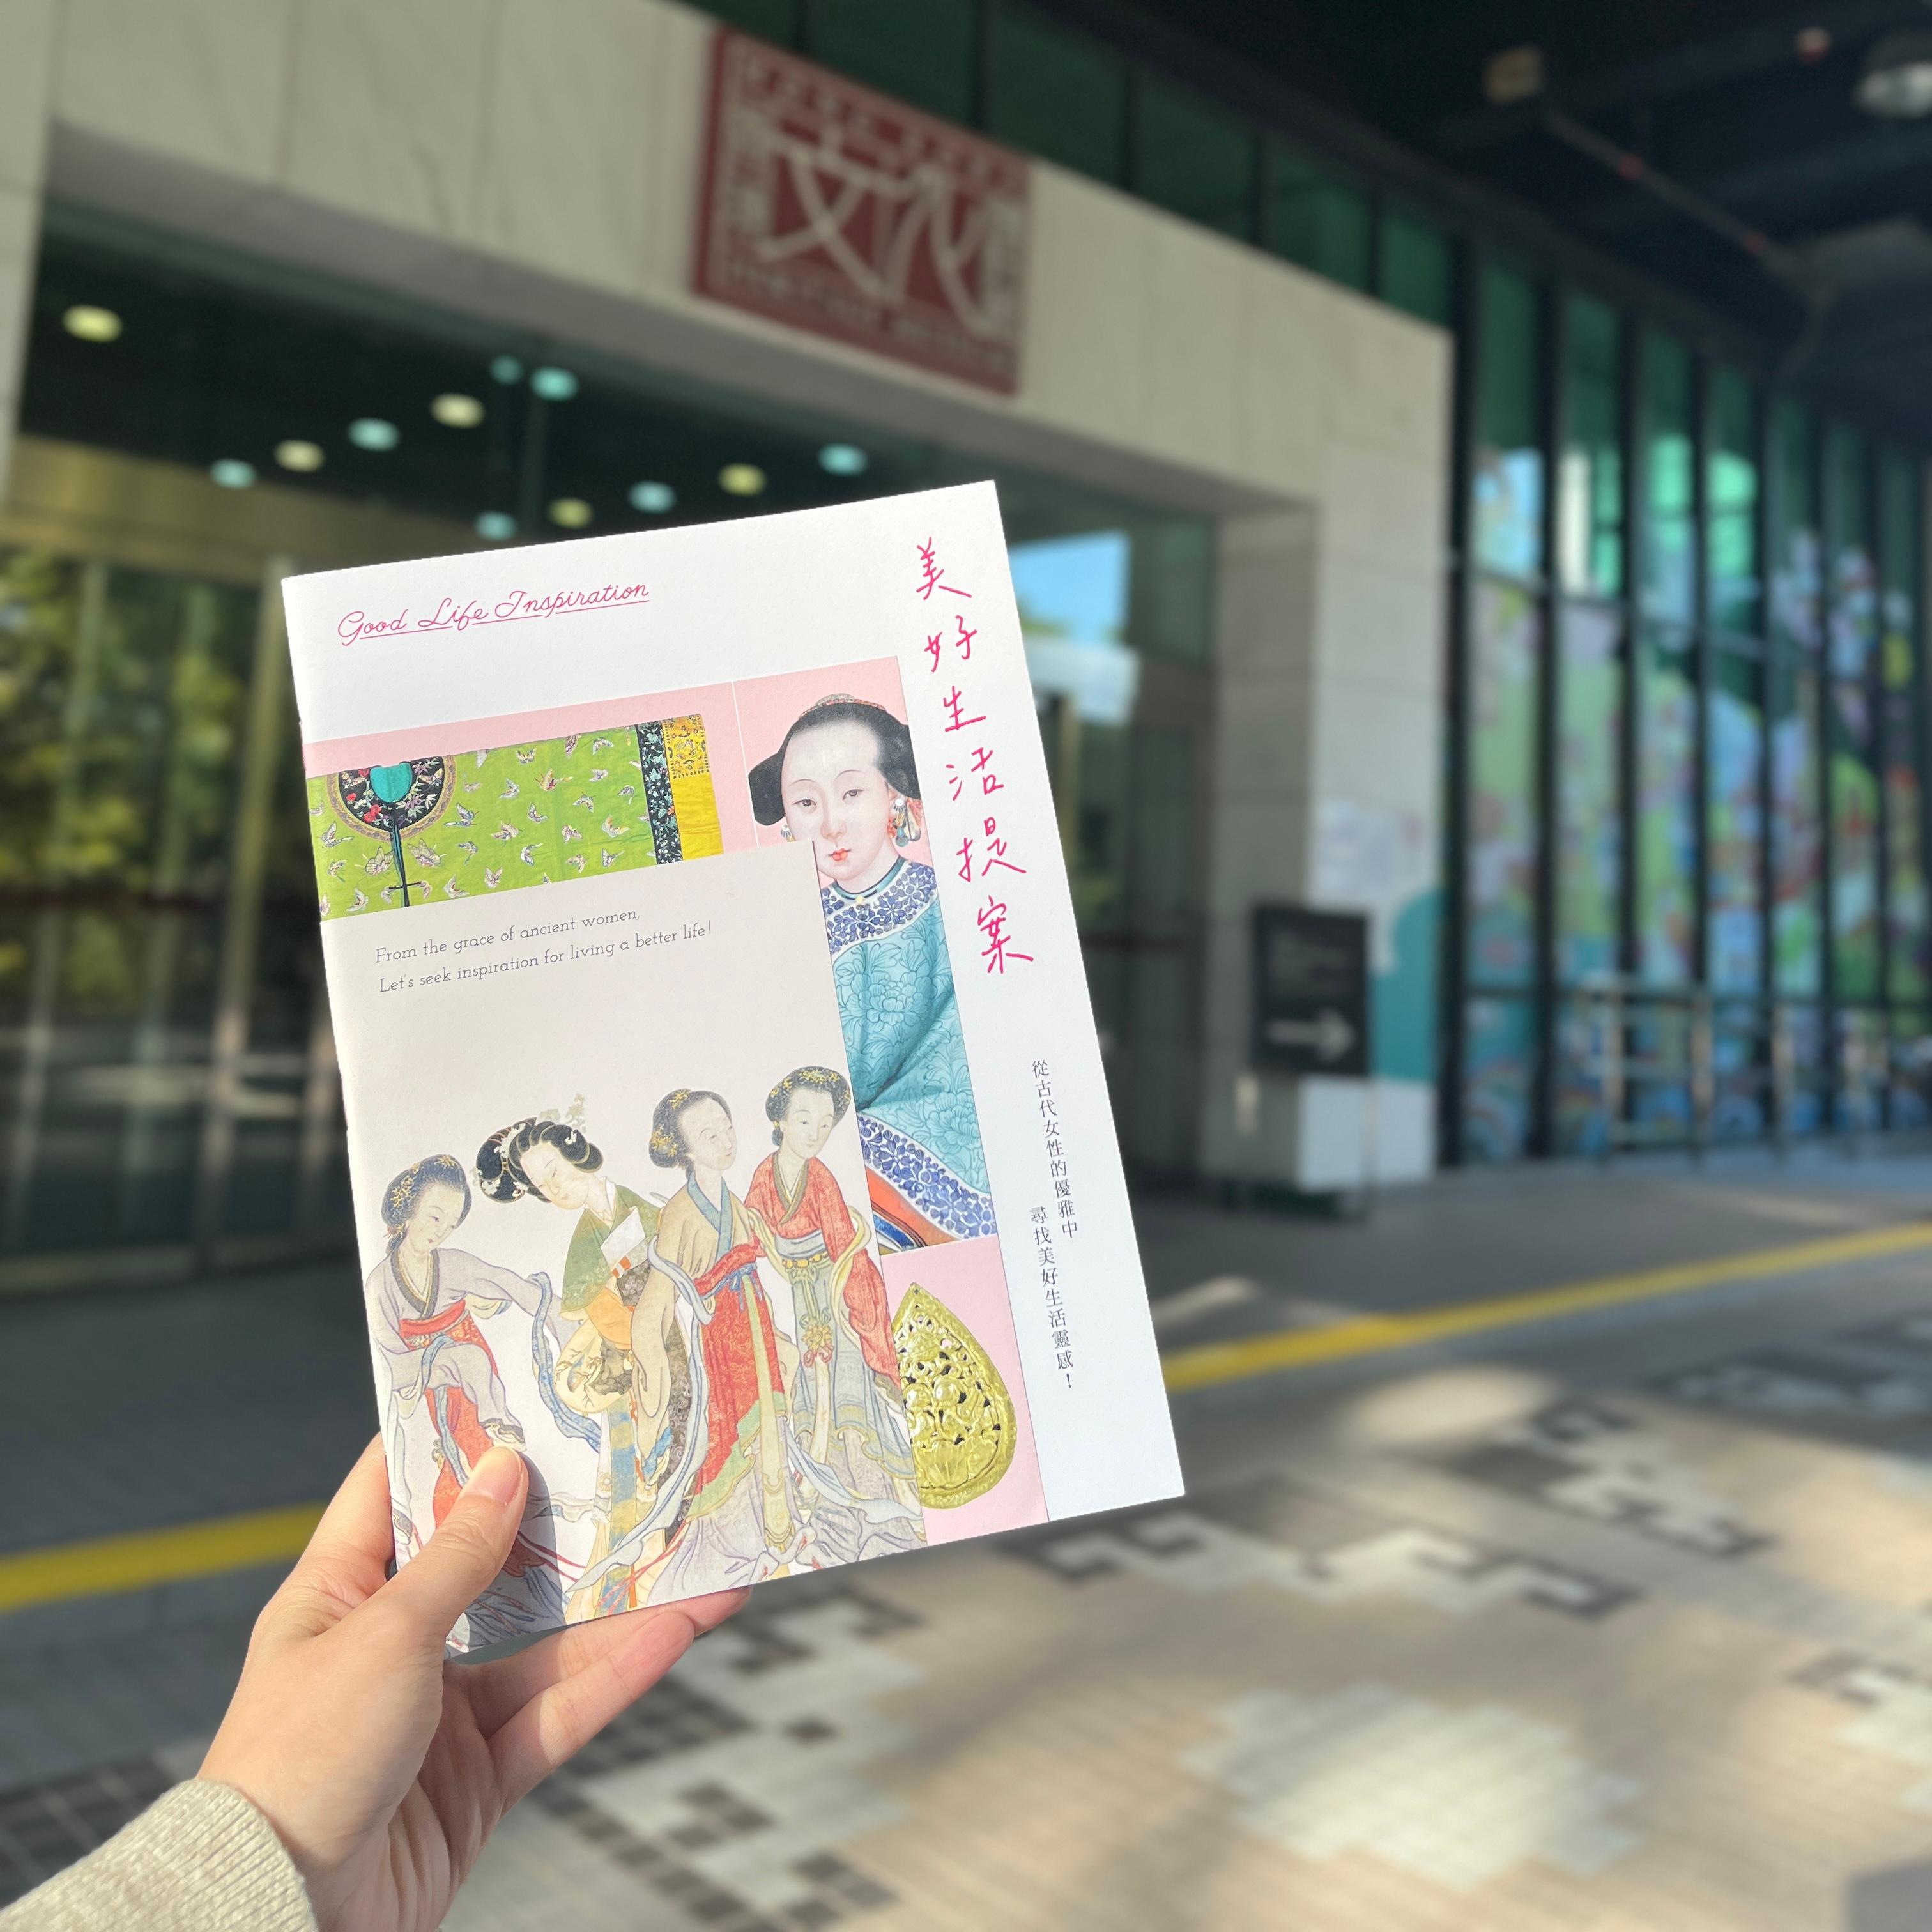 "The Hong Kong Jockey Club Series: Women and Femininity in Ancient China - Treasures from the Nanjing Museum" exhibition being held at the Hong Kong Heritage Museum will end on February 27 (Monday). Picture shows the exhibition booklet, "Good Life Inspiration", featuring 12 good life tips.